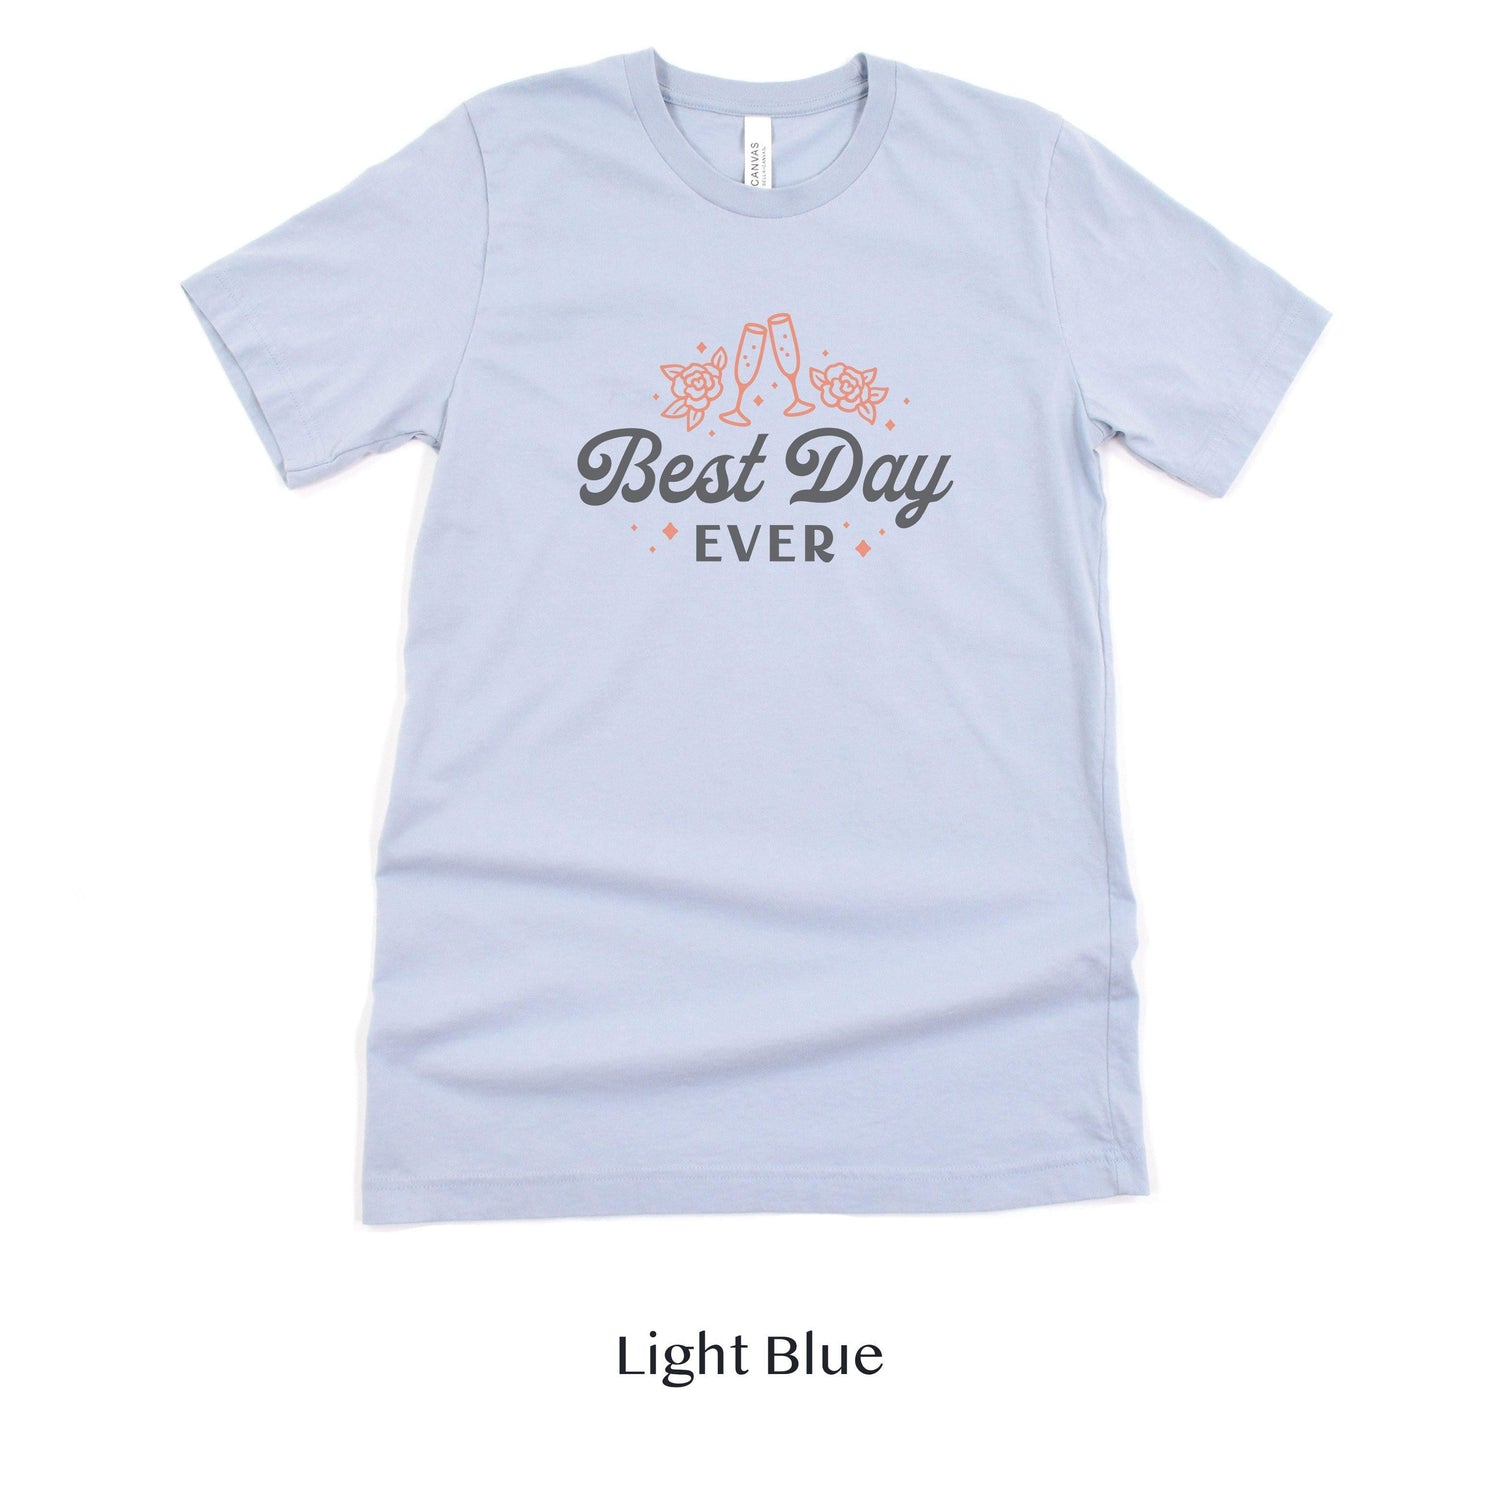 Best Day Ever! Champagne Toast Wedding Day Short-Sleeve Tee - Plus Sizes Available! by Oaklynn Lane - Light Blue Shirt